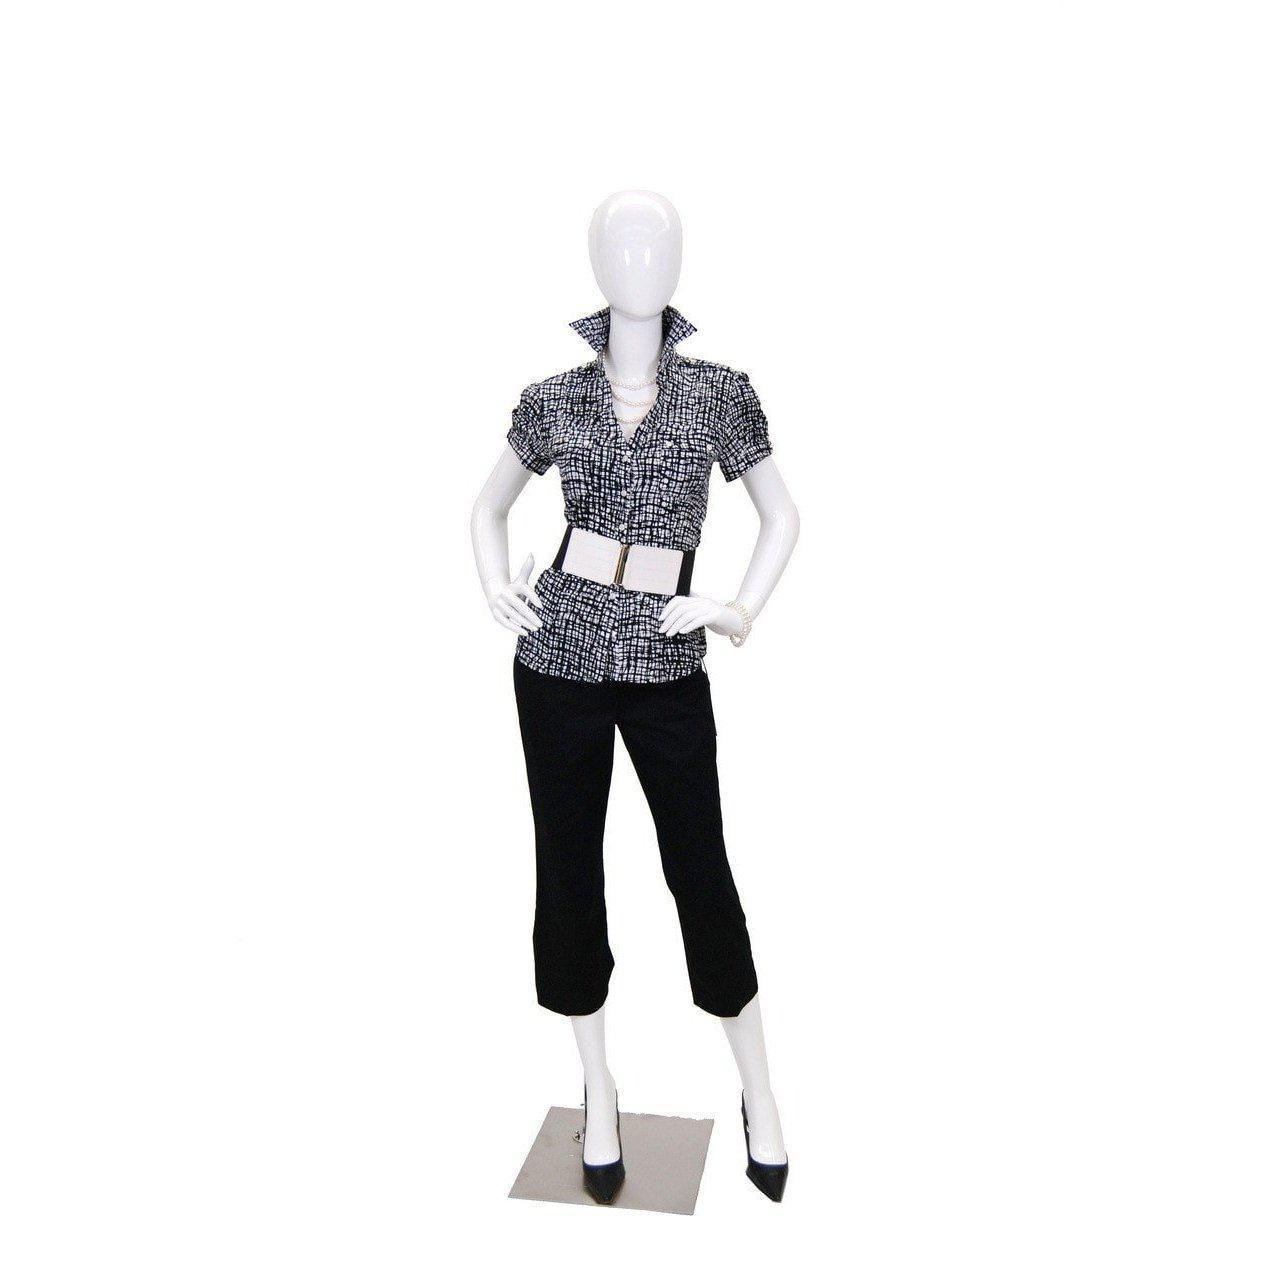 Egghead Female Mannequin MM-A4W1 - Mannequin Mall